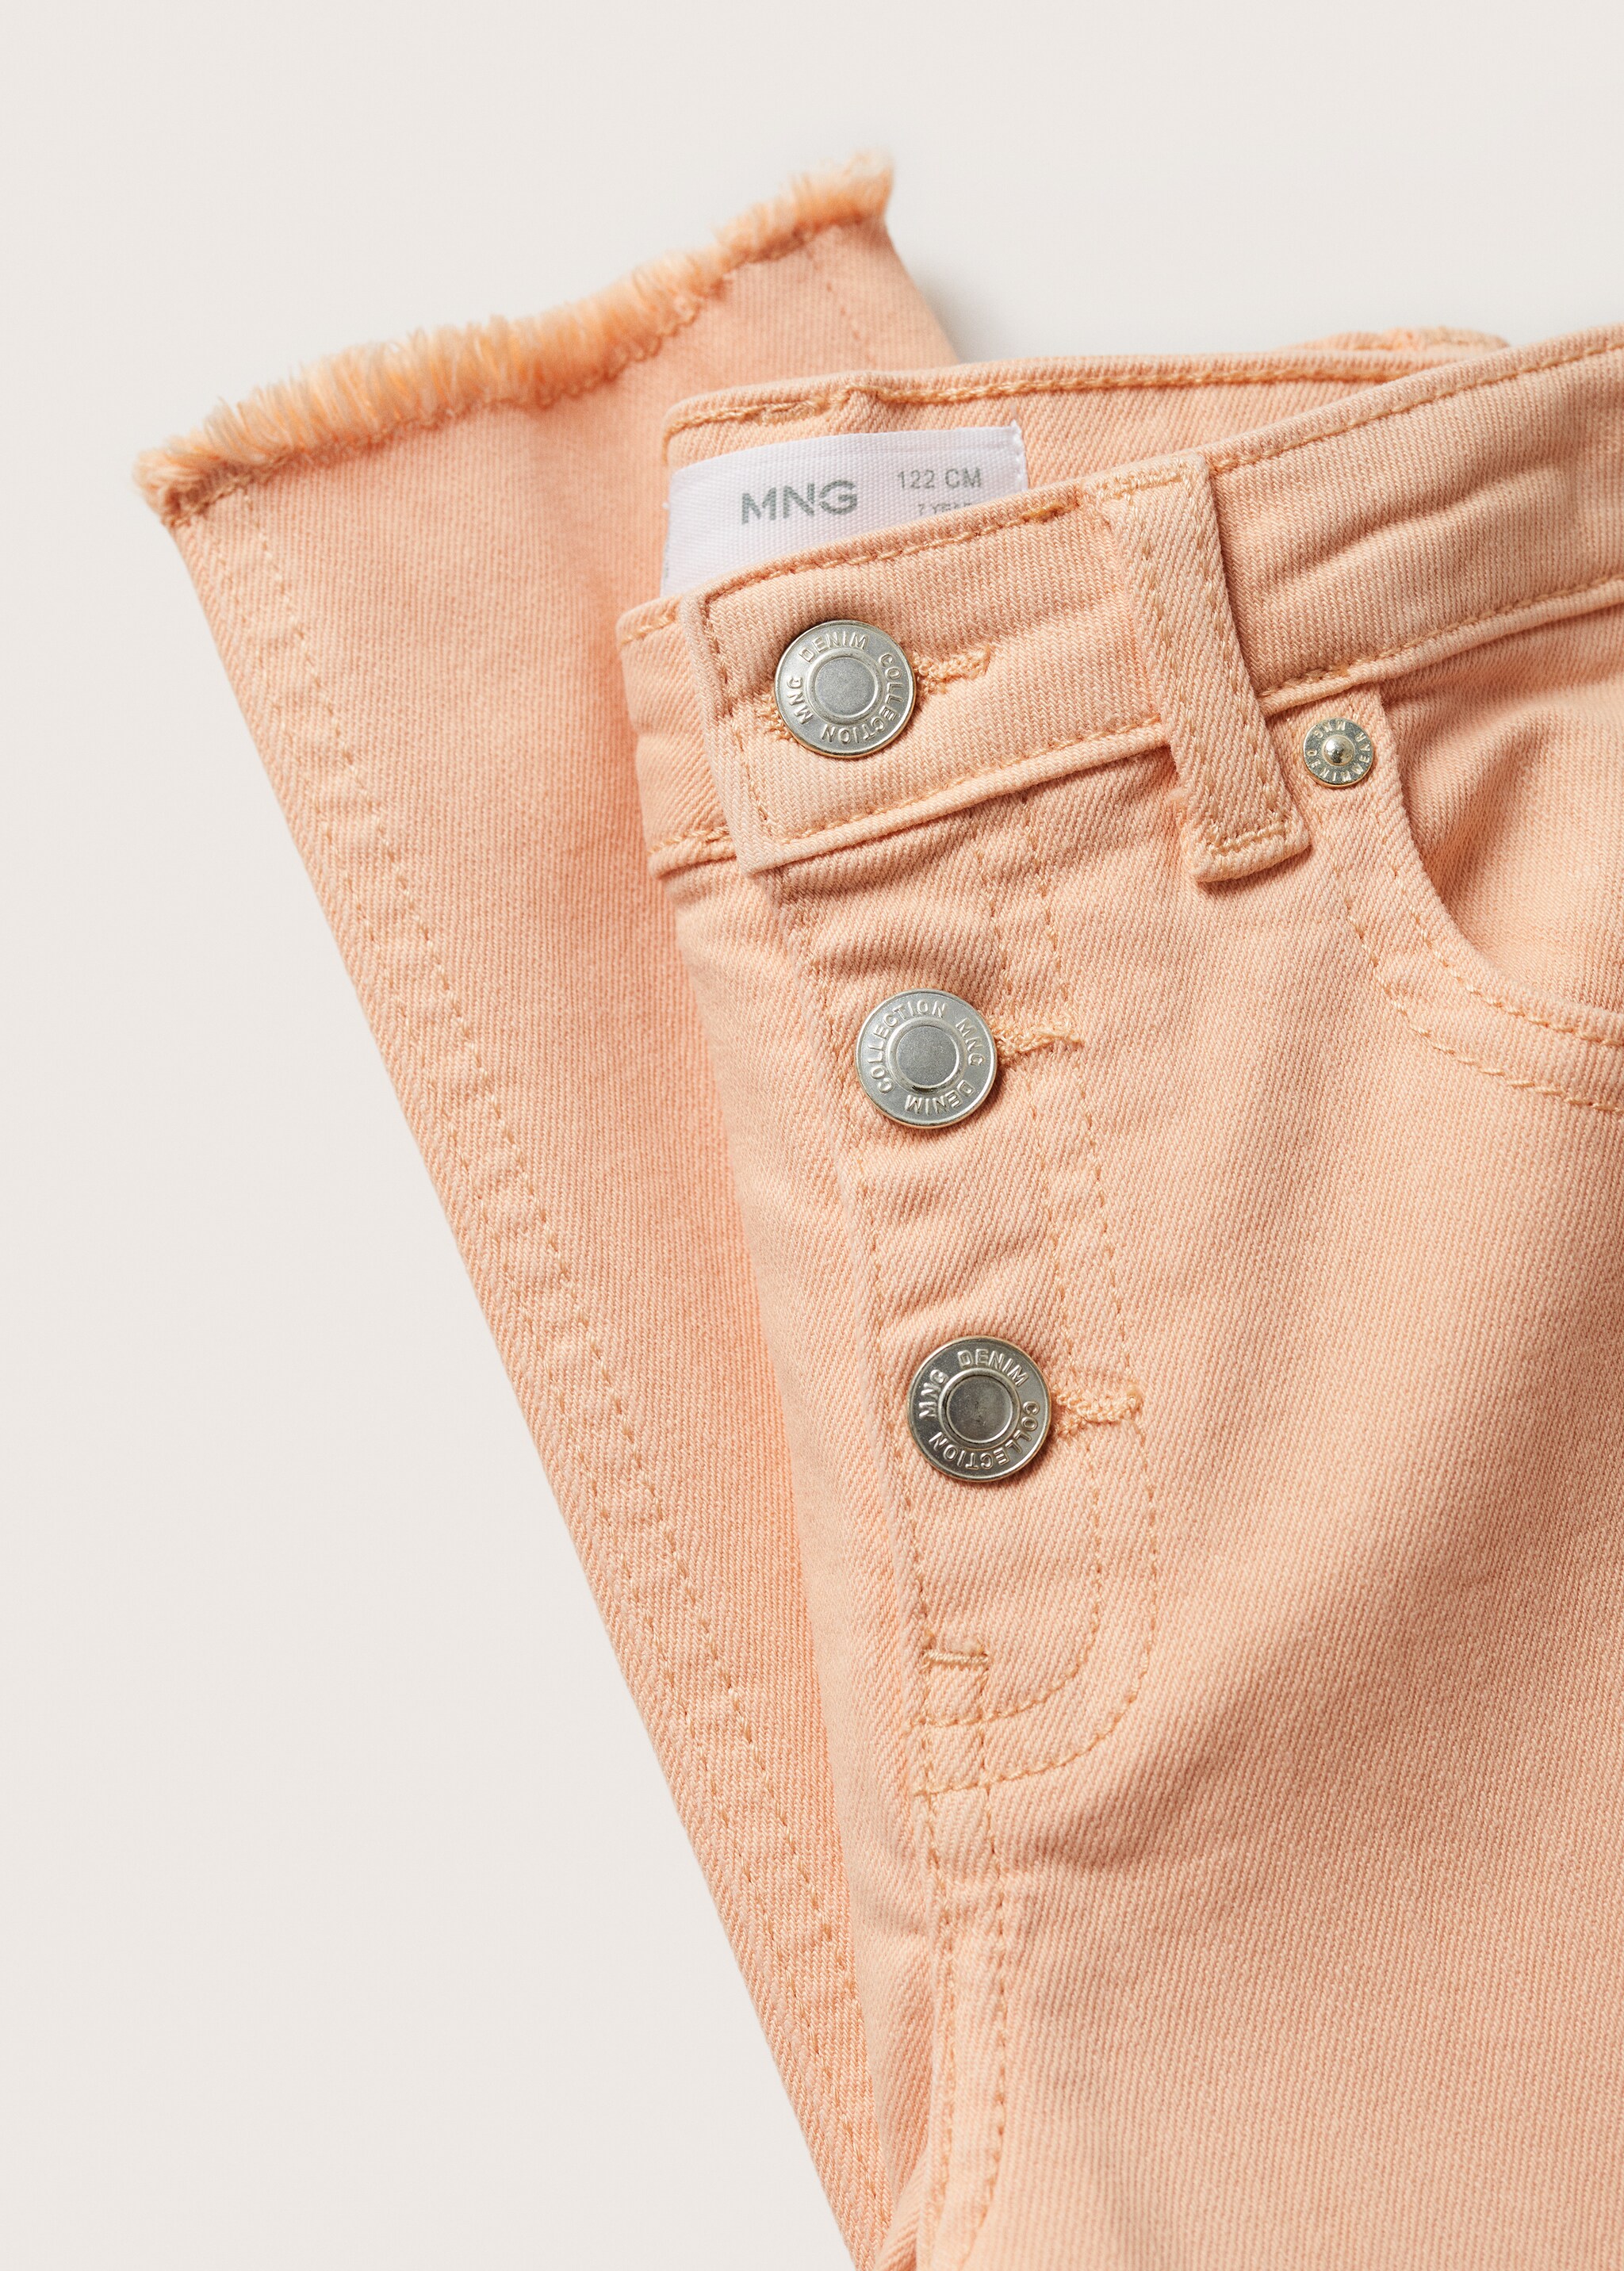 Skinny jeans with buttons - Details of the article 8